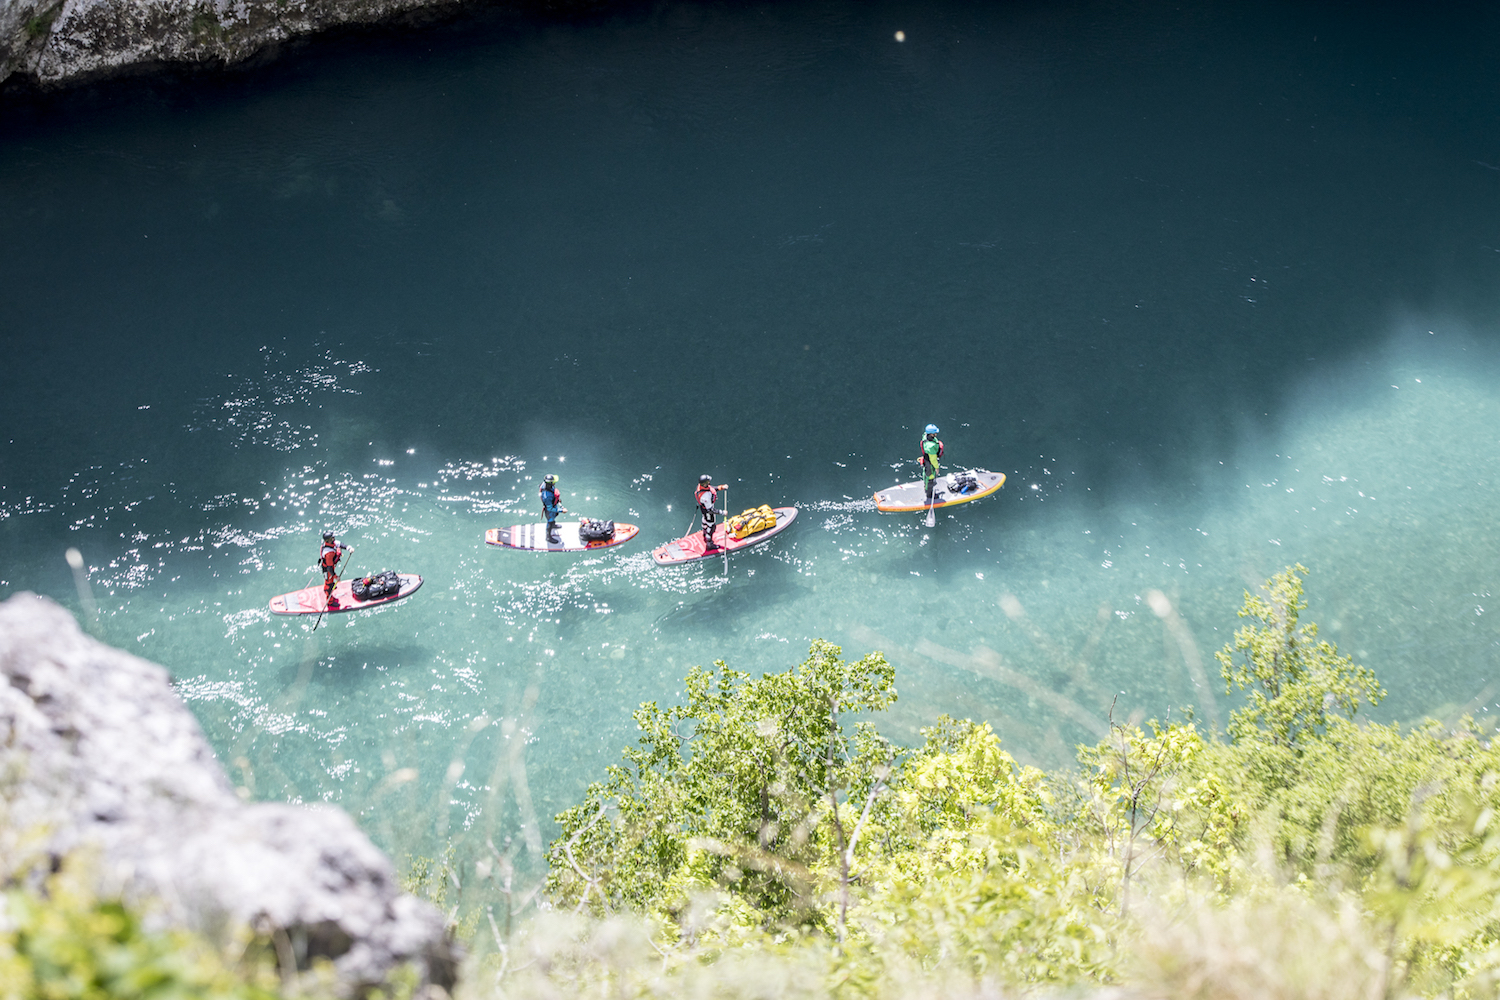 Tara SUP Project – A Stand Up Paddle Adventure